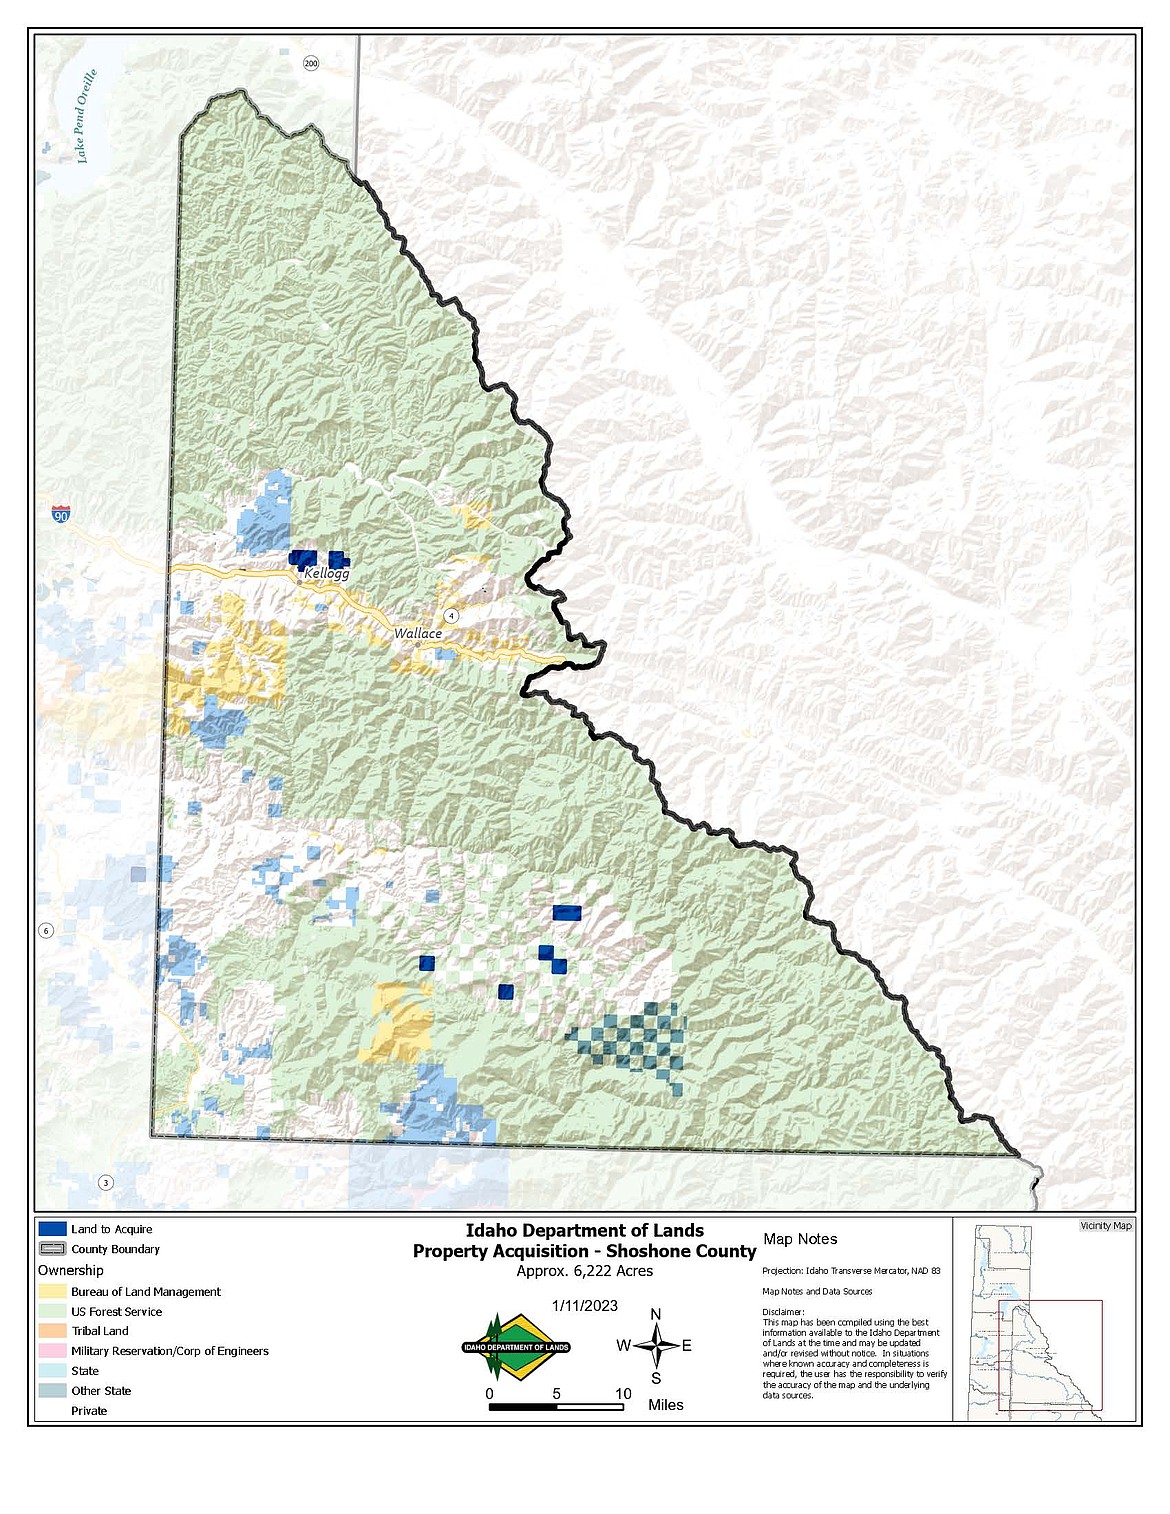 Idaho Department of Lands announced it purchased almost 18,050 acres of timberland spread across five north Idaho counties. Above, a map shows the location of the parcels purchased in Shoshone County.